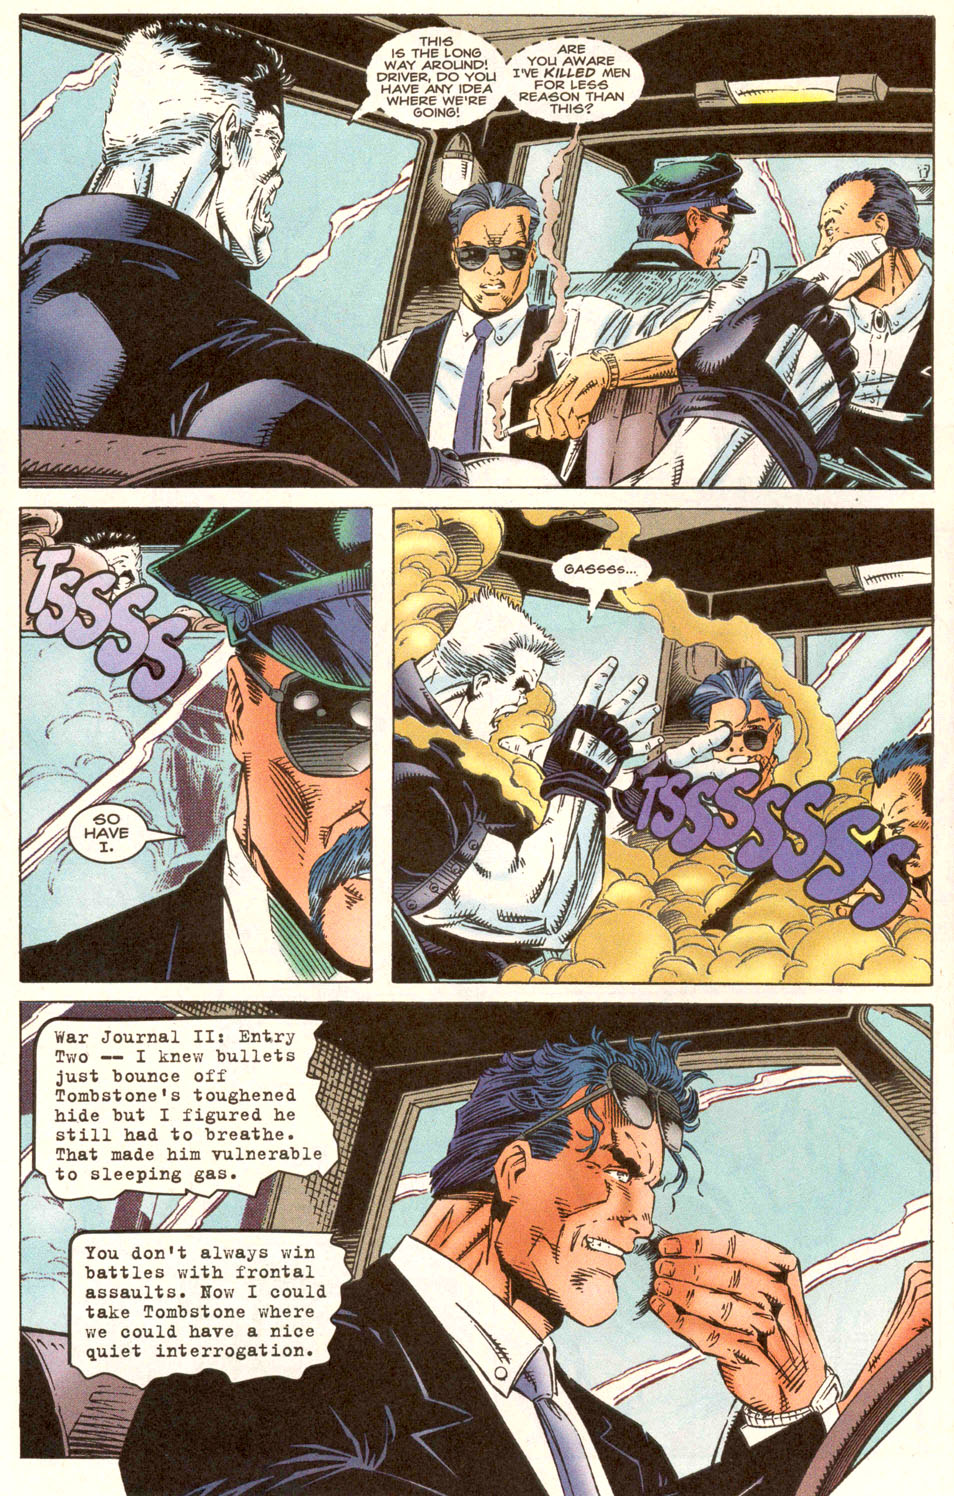 Punisher (1995) issue 10 - Last Shot Fired - Page 5